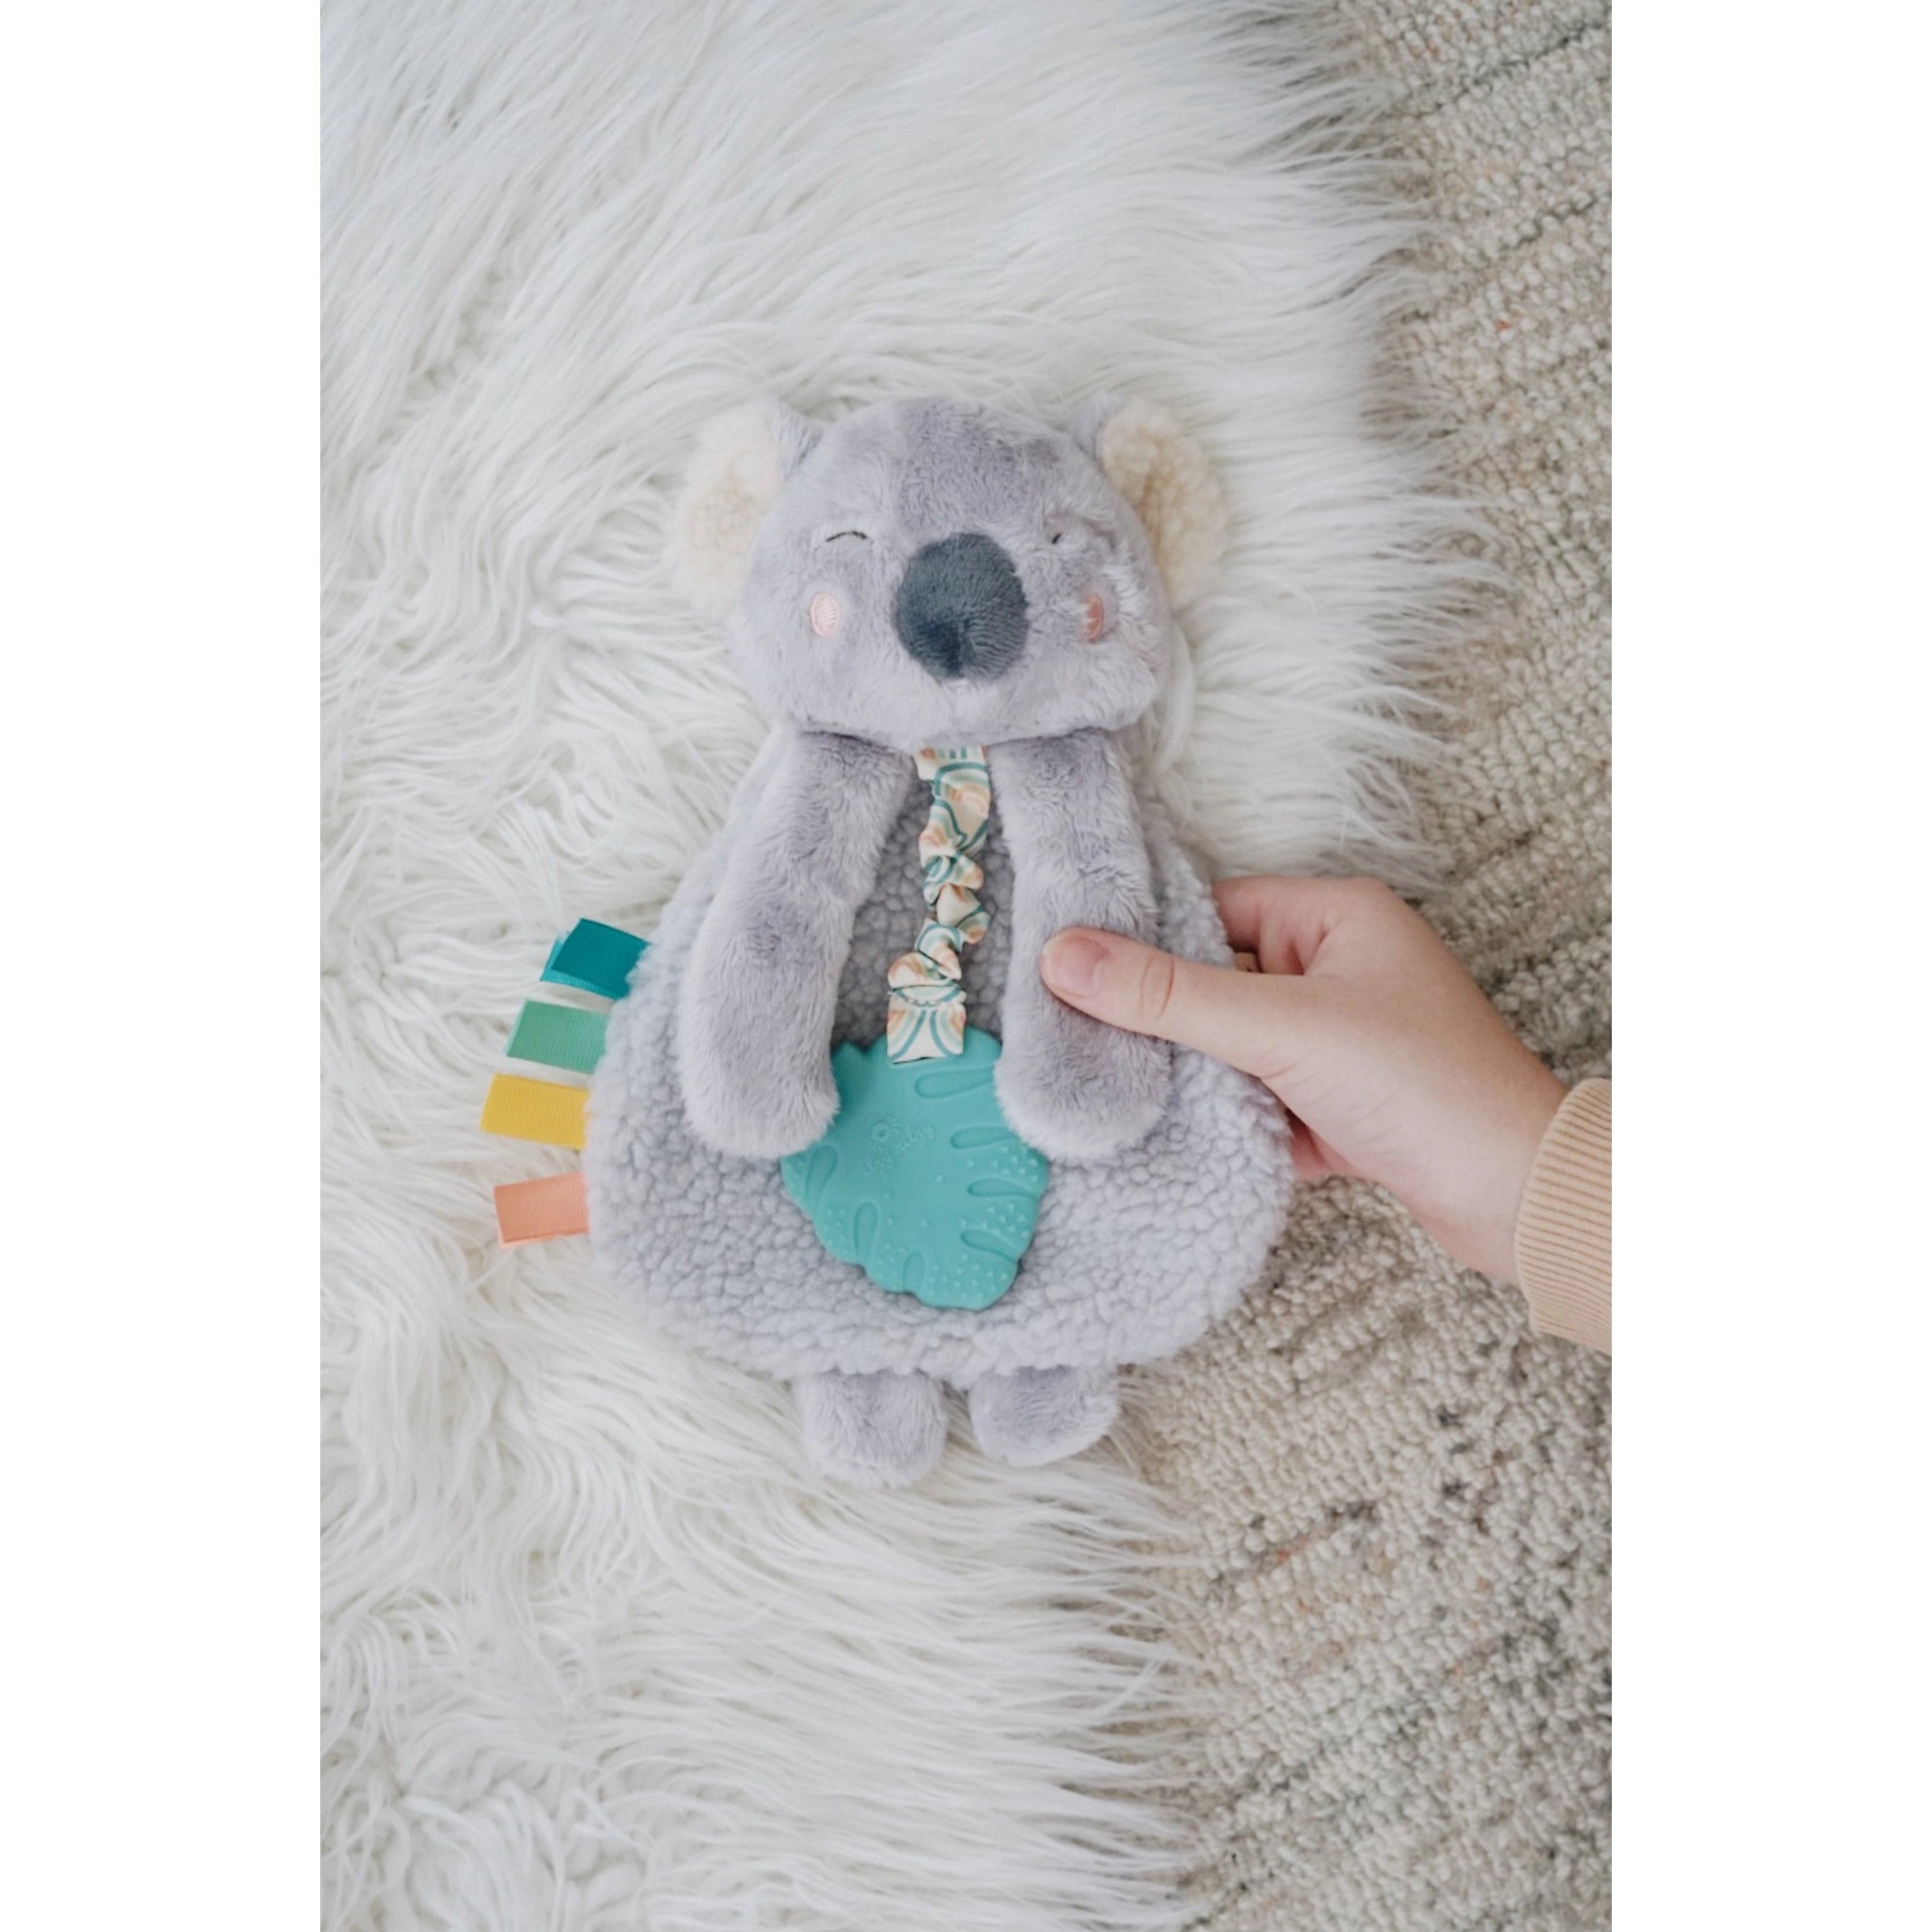 Kayden The Koala Itzy Friends Itzy Lovey™ Plush with Silicone Teether Toy Itzy Ritzy Lil Tulips